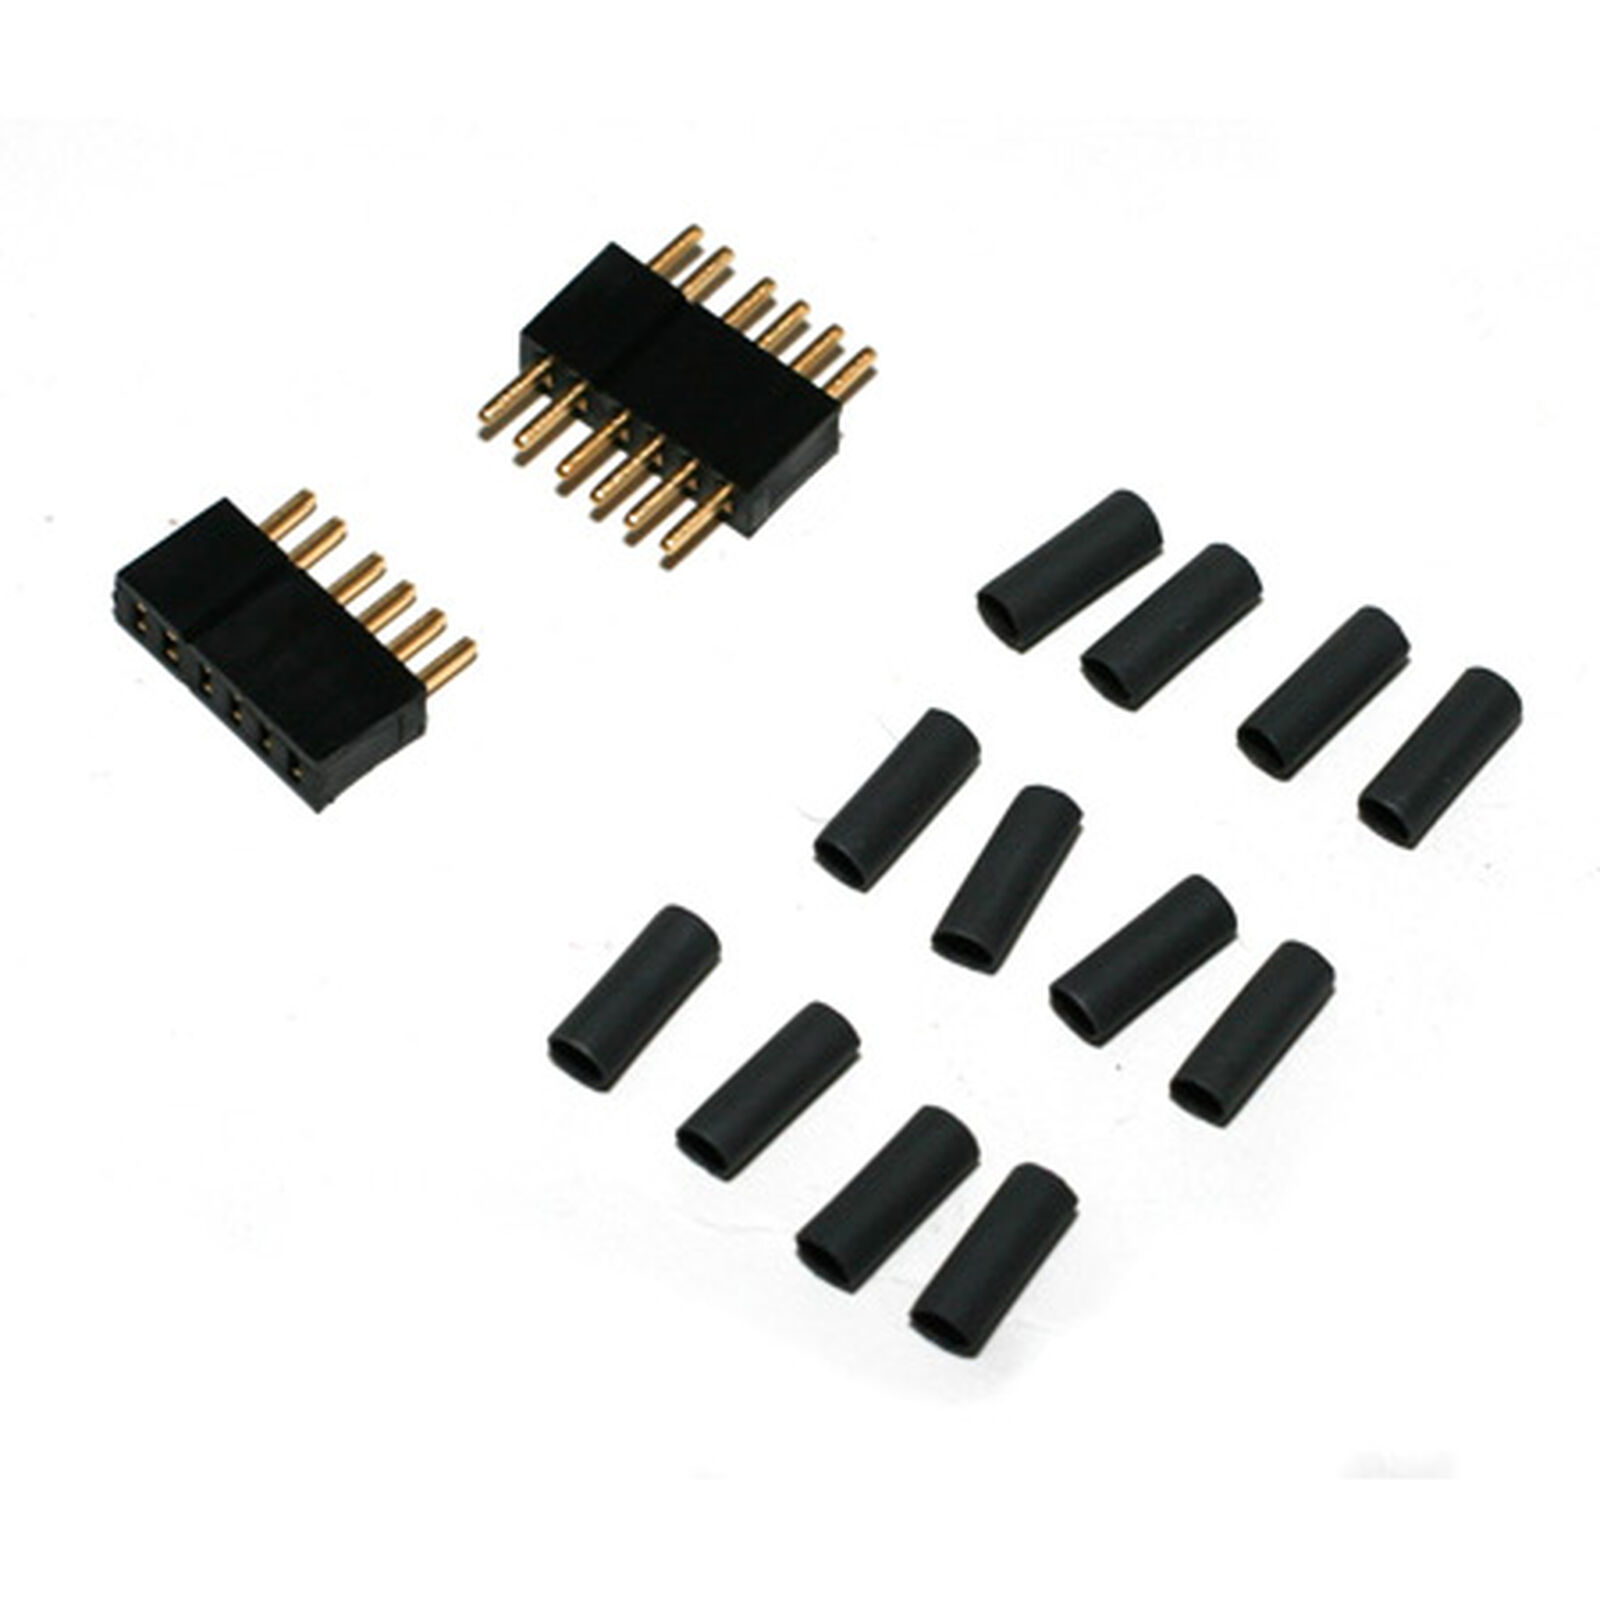 Connector: 6 Pin Set with Shrink Tubing